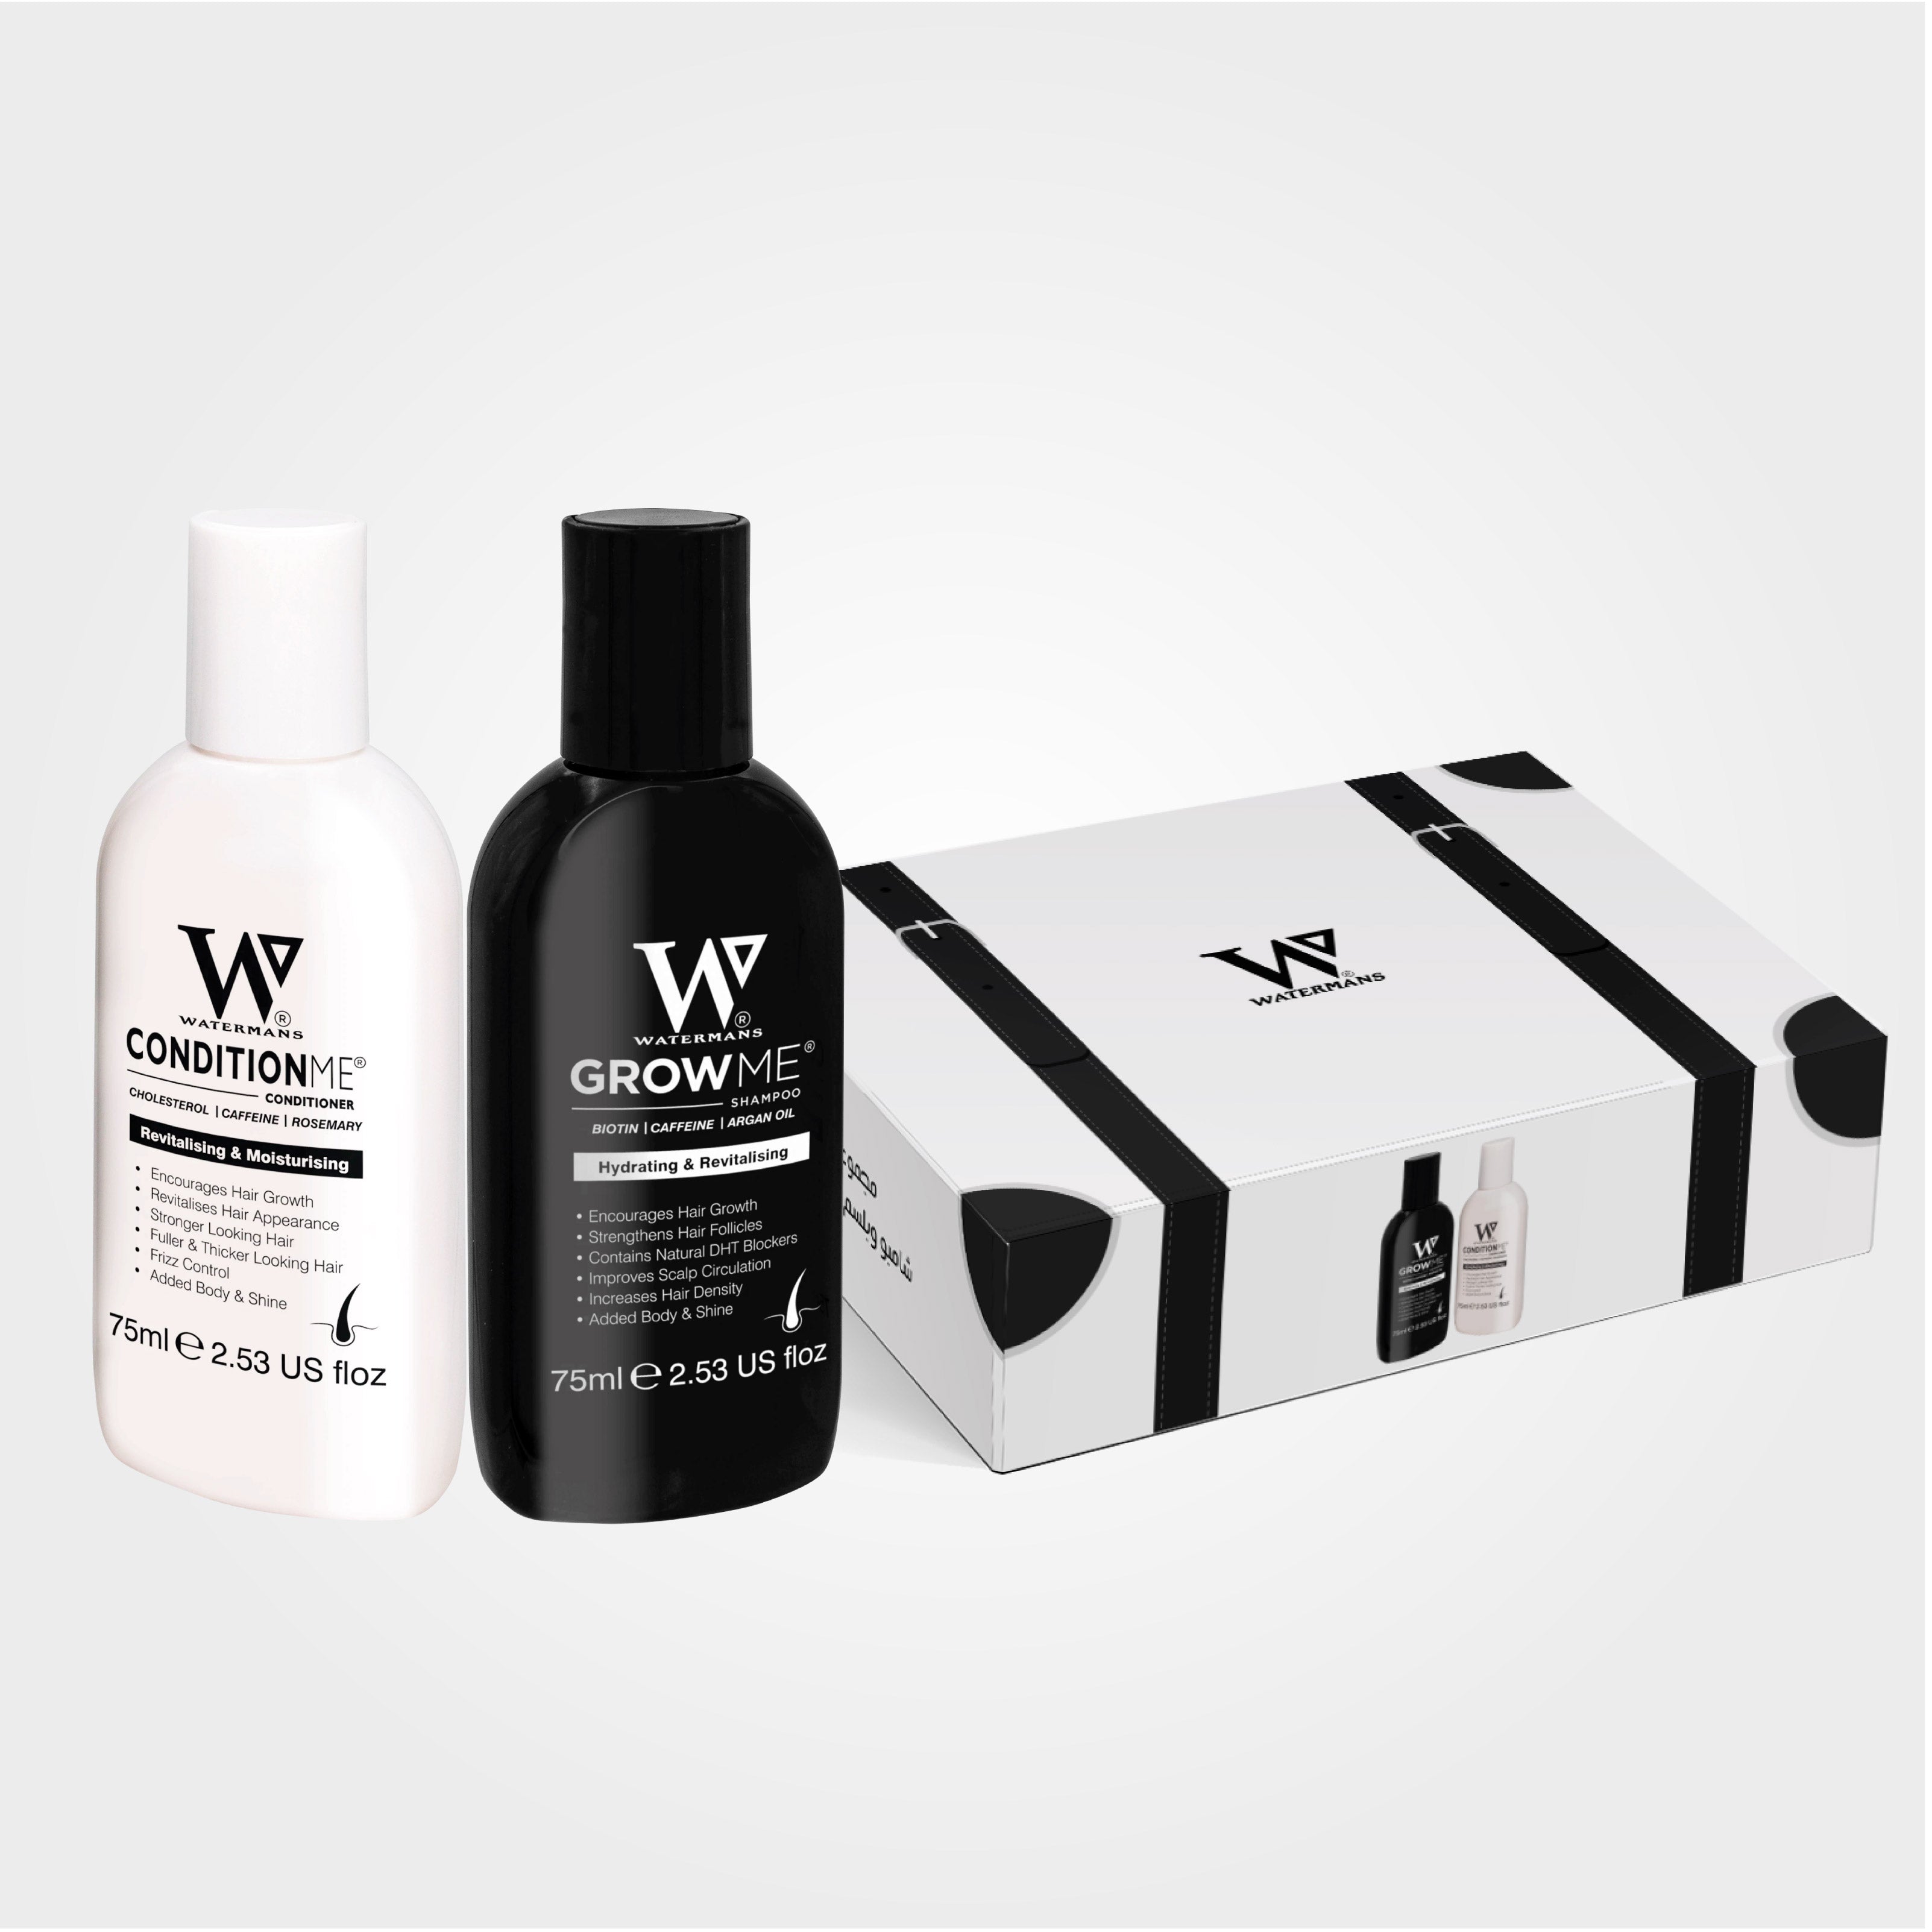 Watermans Travel Size Shampoo and Conditioner Set